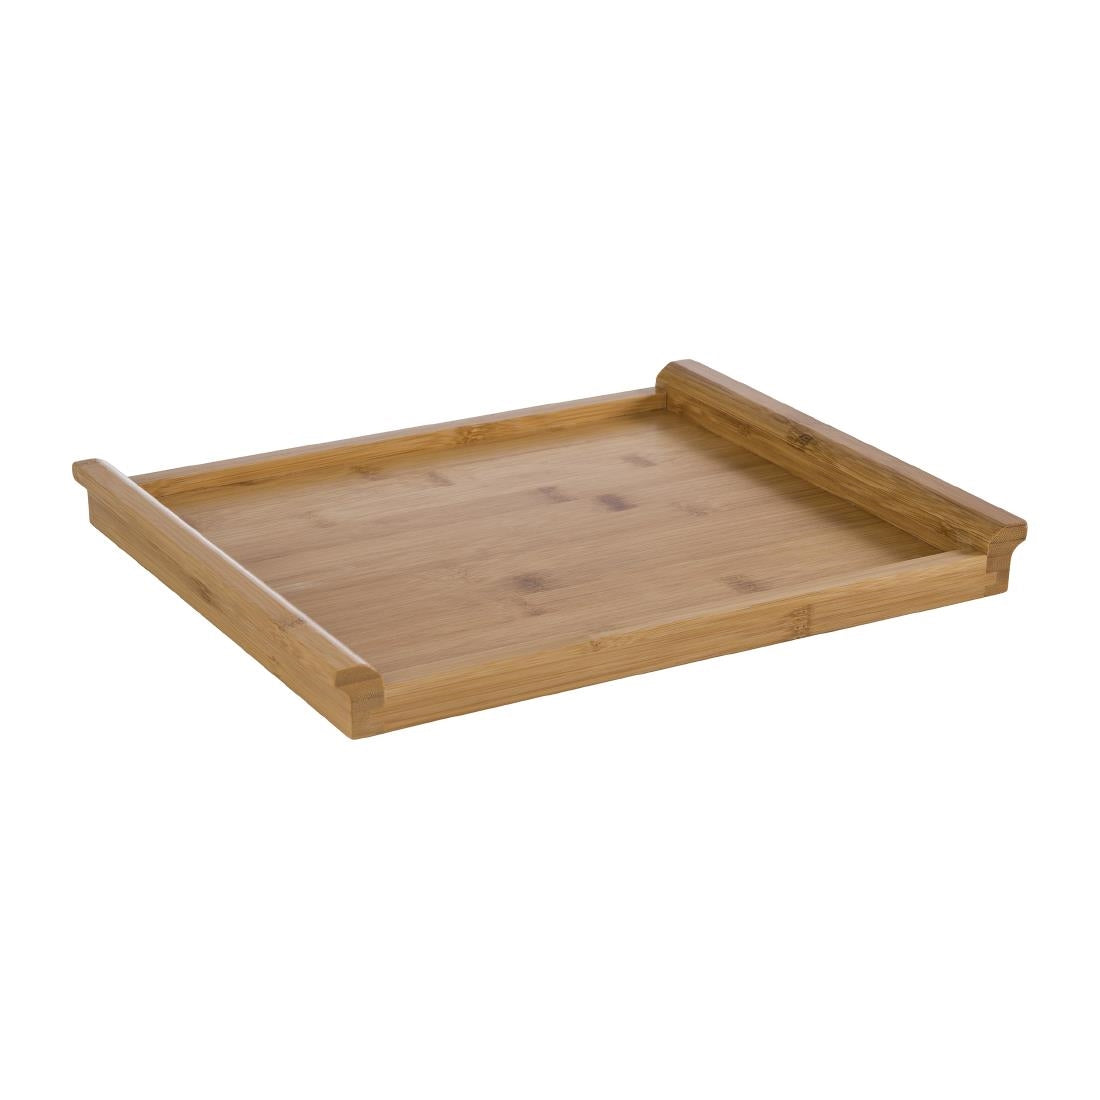 FT207 APS Bamboo Tray GN 1/2 325 x 265mm JD Catering Equipment Solutions Ltd